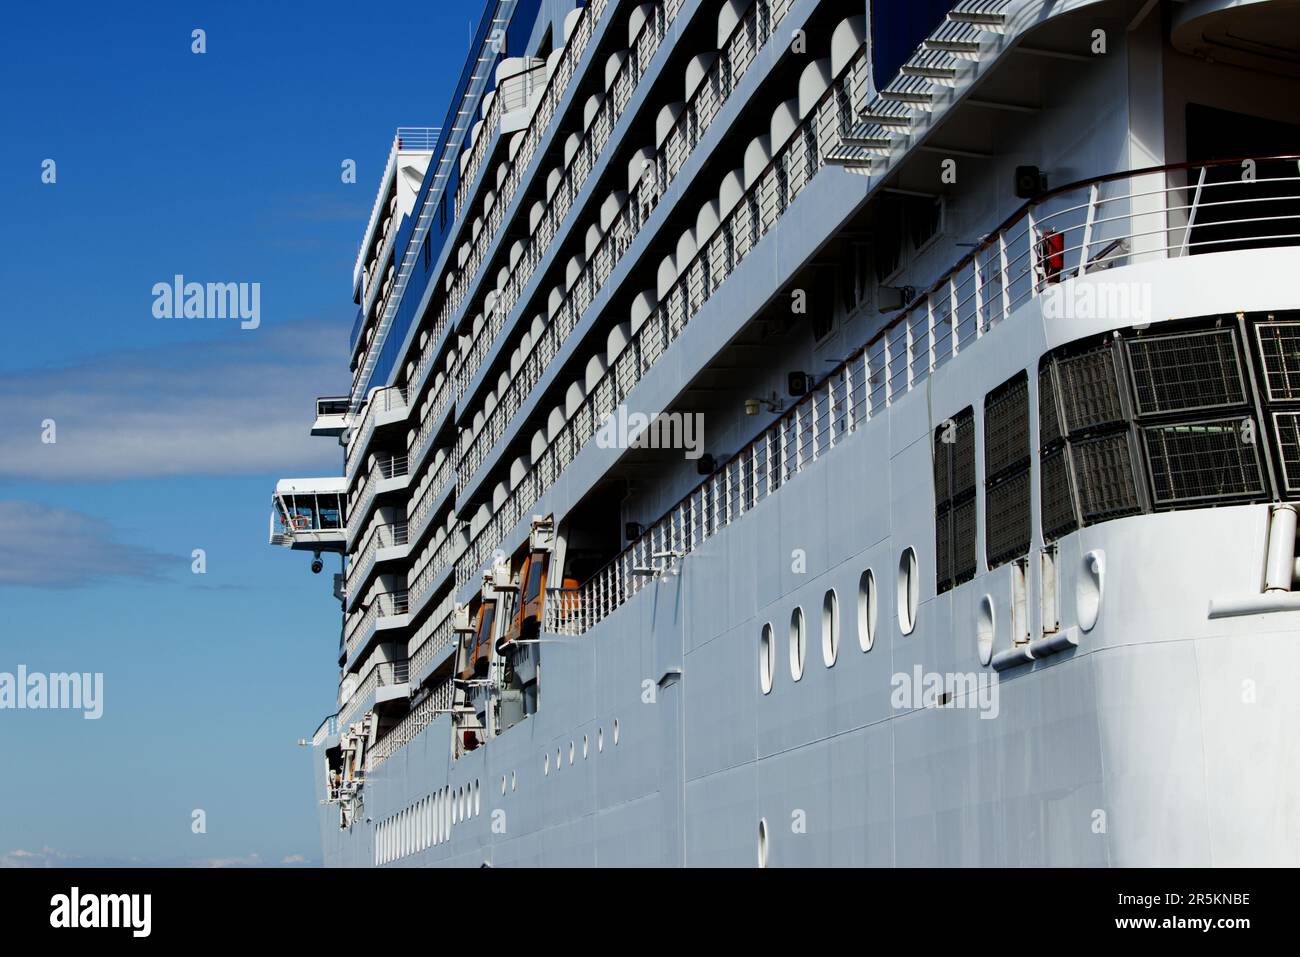 Close up of a side of cruise ship - commercial vessel Stock Photo